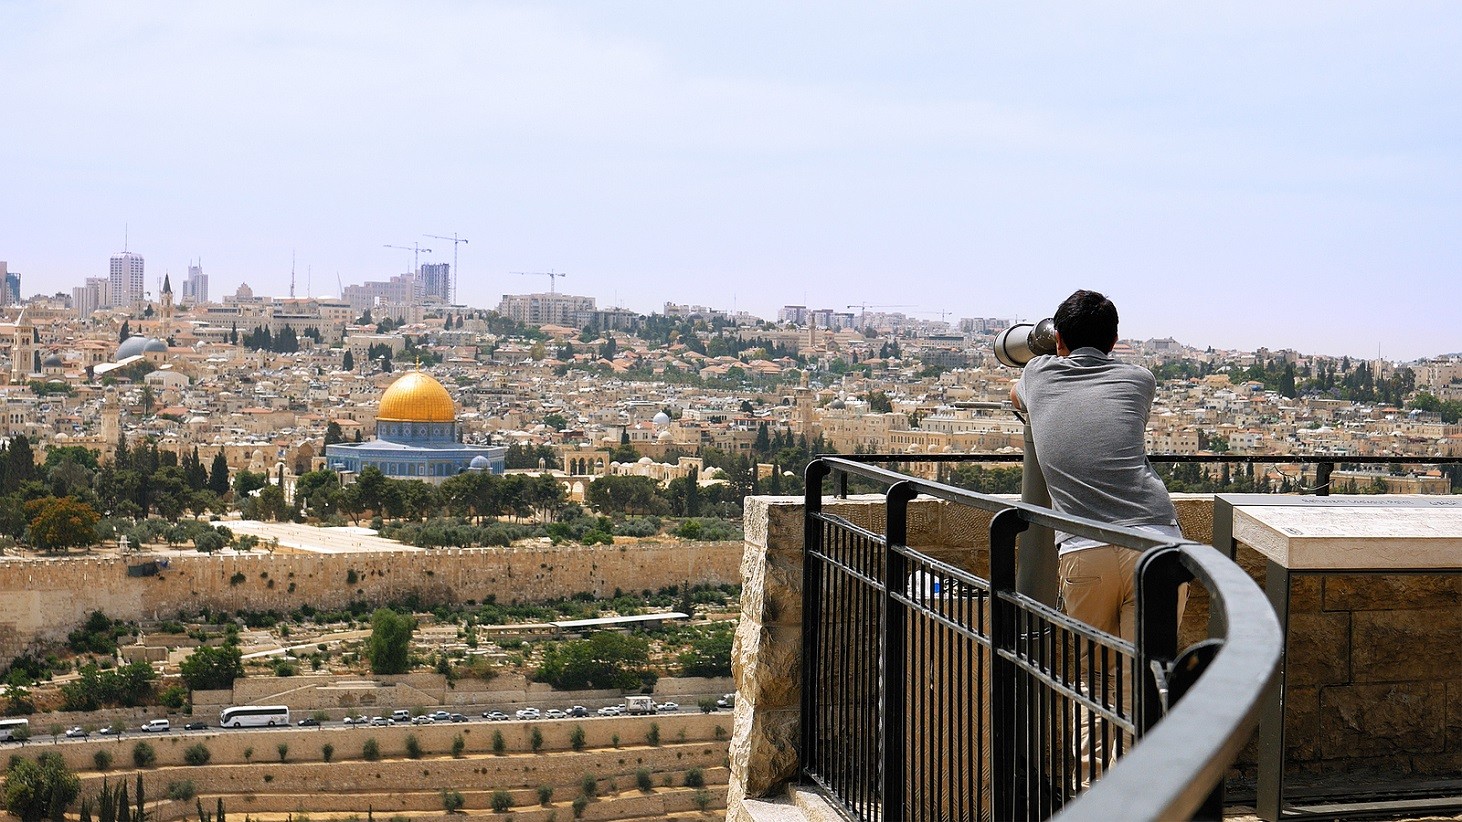 Jerusalem, Israel - May 25, 2017: Tourist looks in binoculars tower viewer at the Jerusalem Old City view. Mount of Olives is a famous Holy Land place and it has a fantastic view to the Old Jerusalem